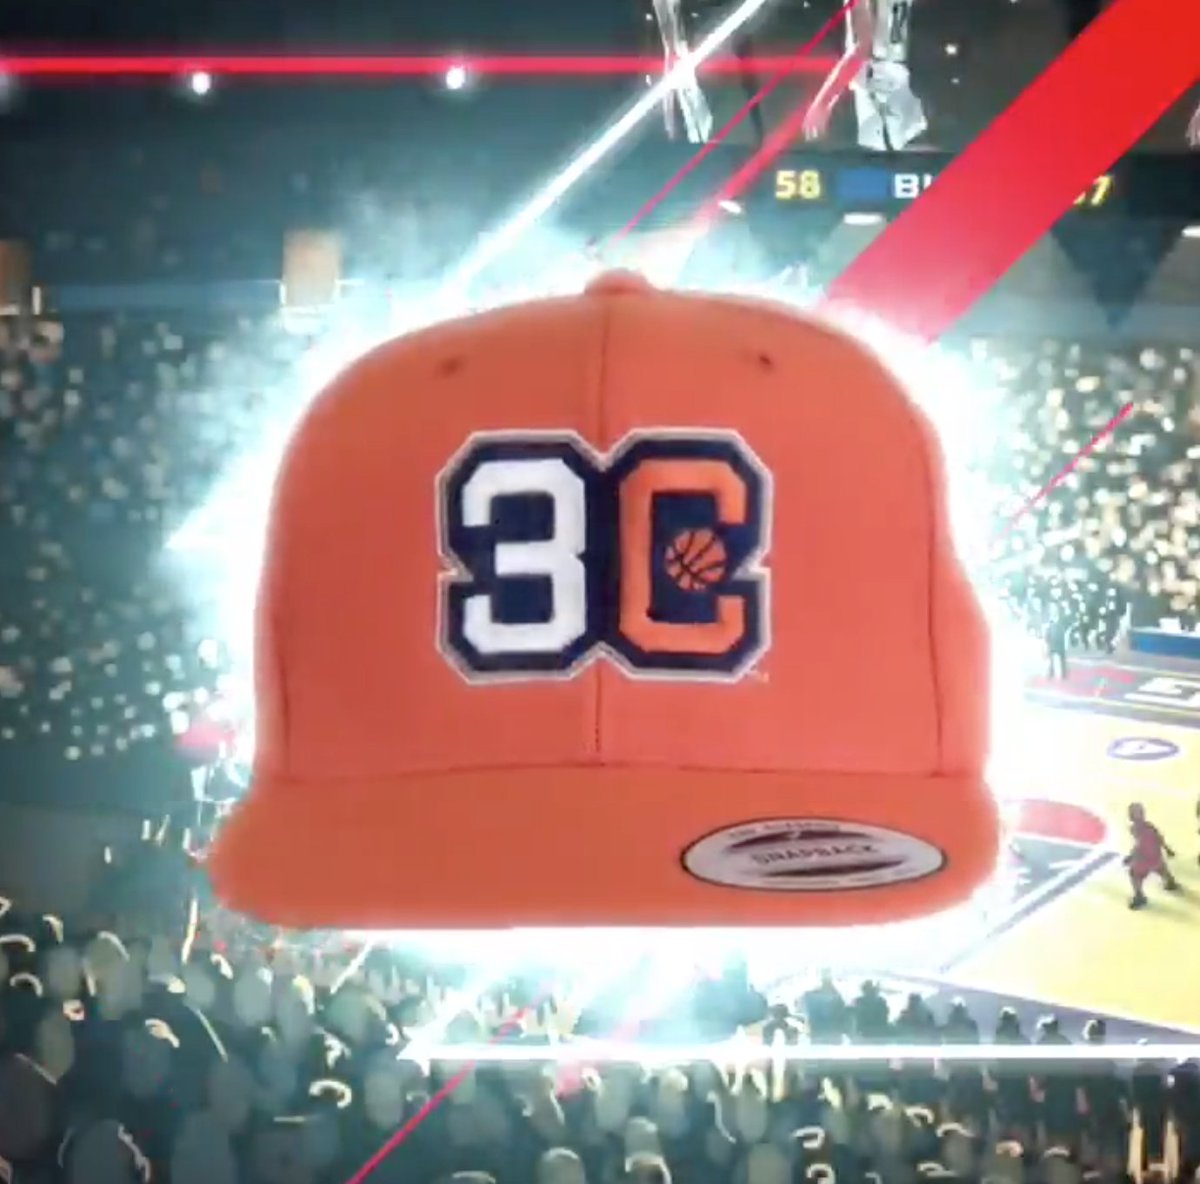 You asked for them! @thebig3 team hats are now available at https://t.co/8PxusdK2fQ. https://t.co/FmPVtZC7MZ